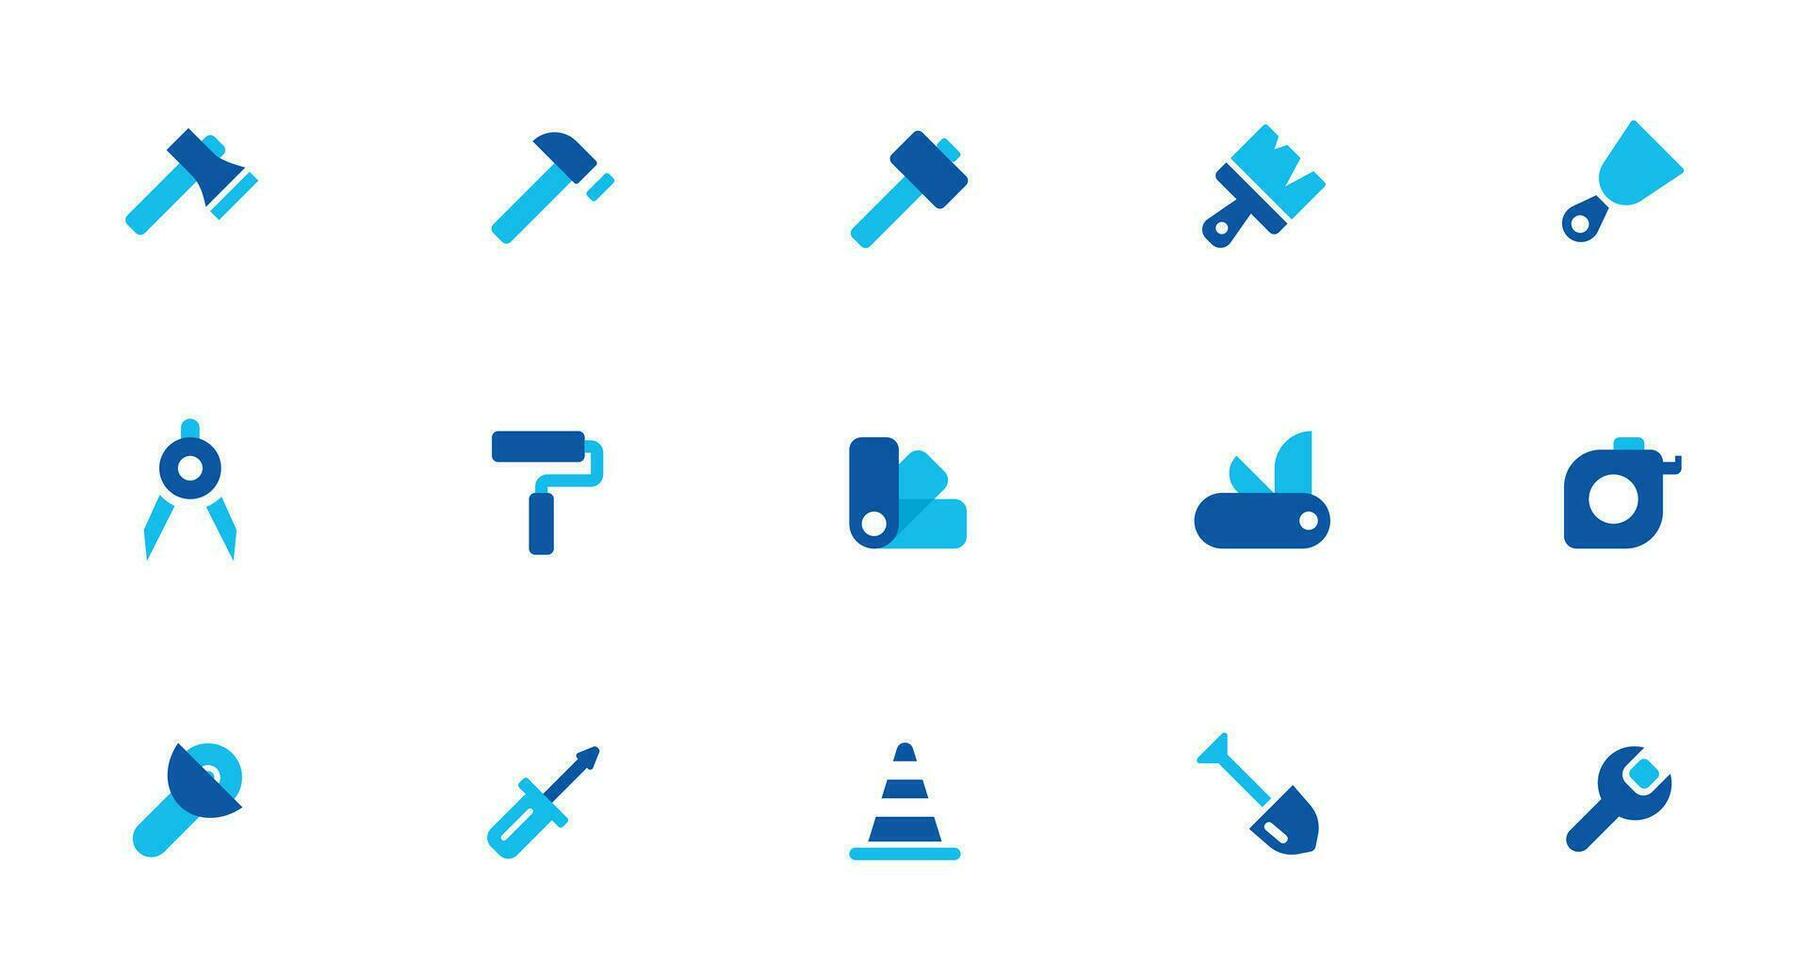 Construction tool icon collection - vector illustration